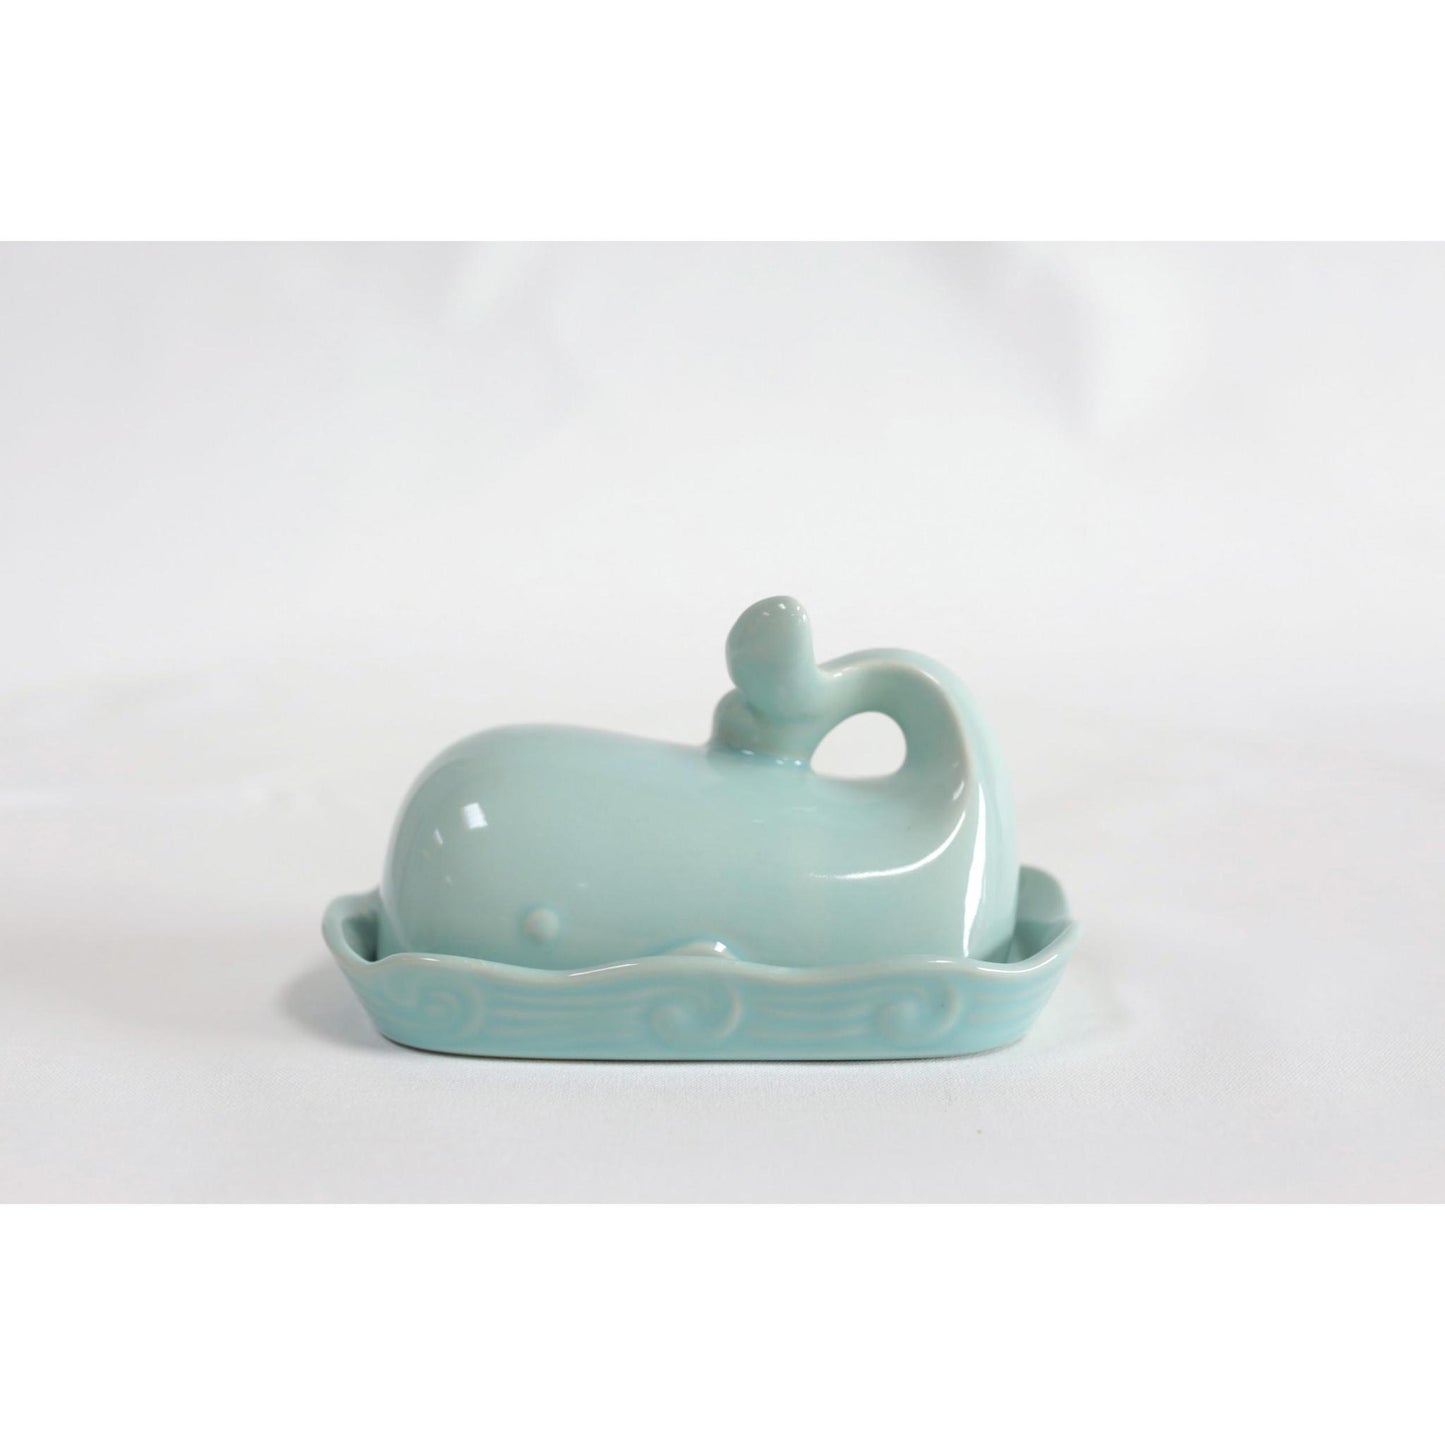 Stoneware Whale Butter Dish